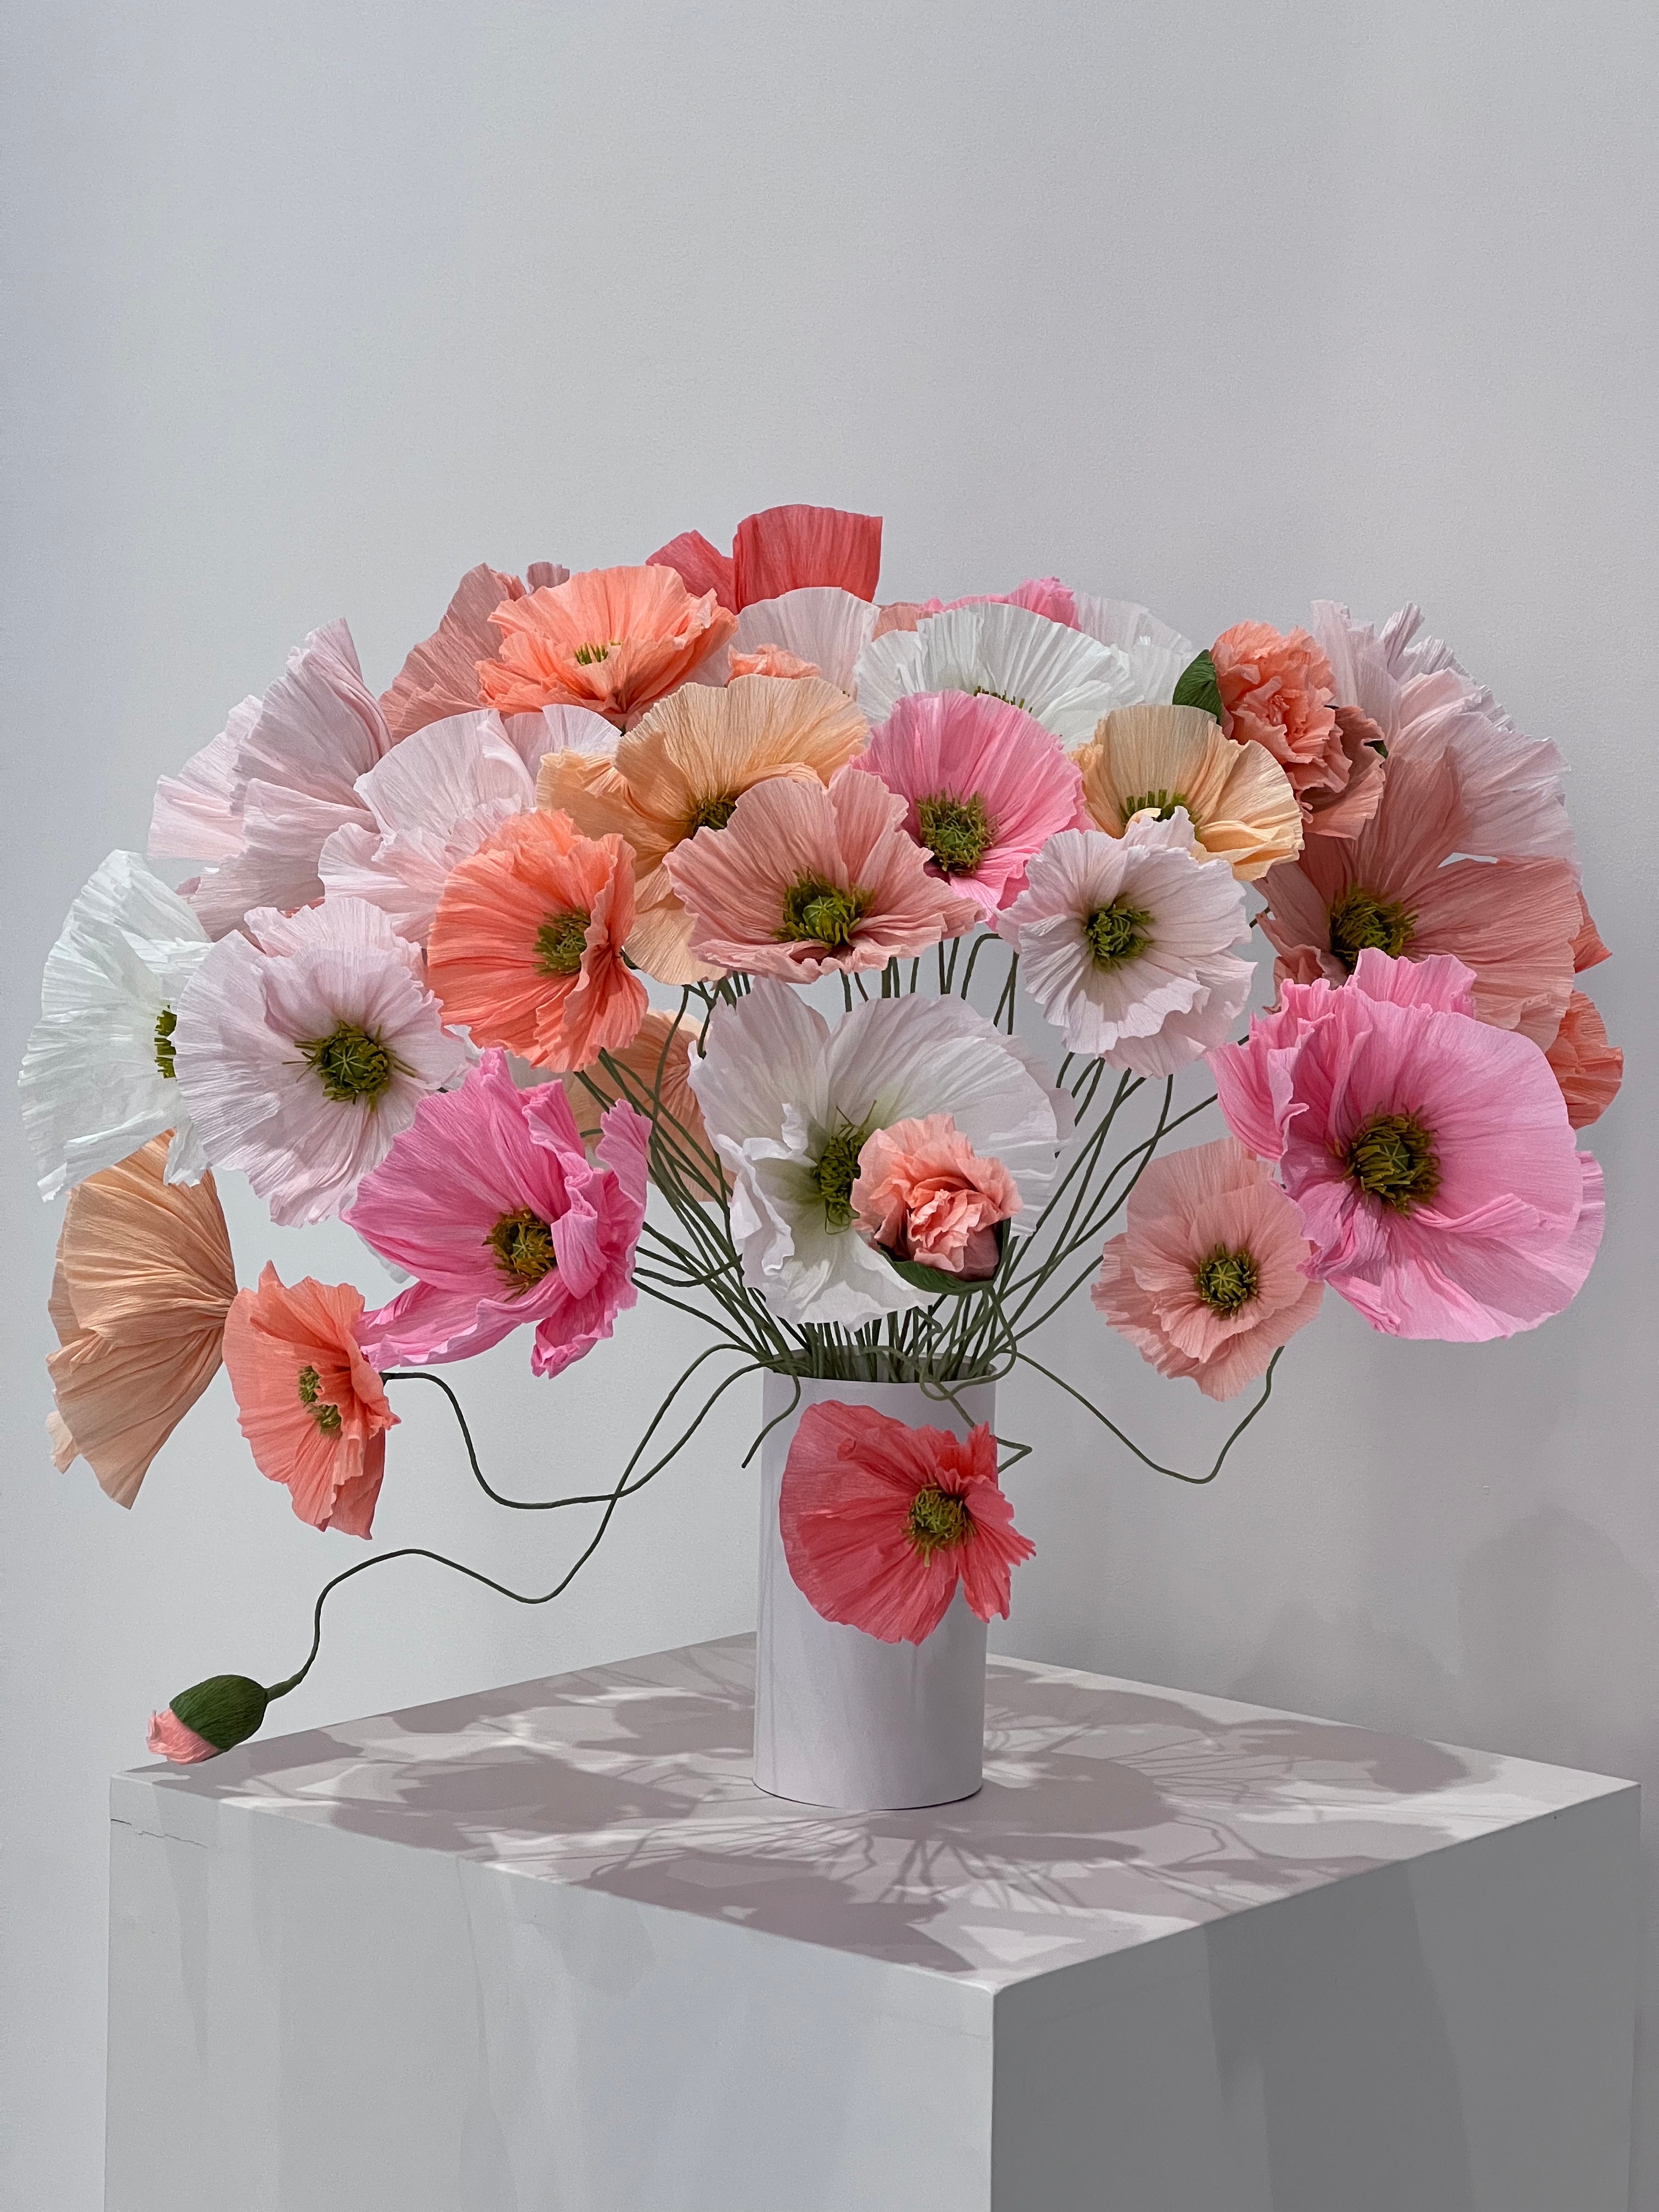 An enchanting arrangement of paper poppies, capturing the beauty and allure of these floral wonders.